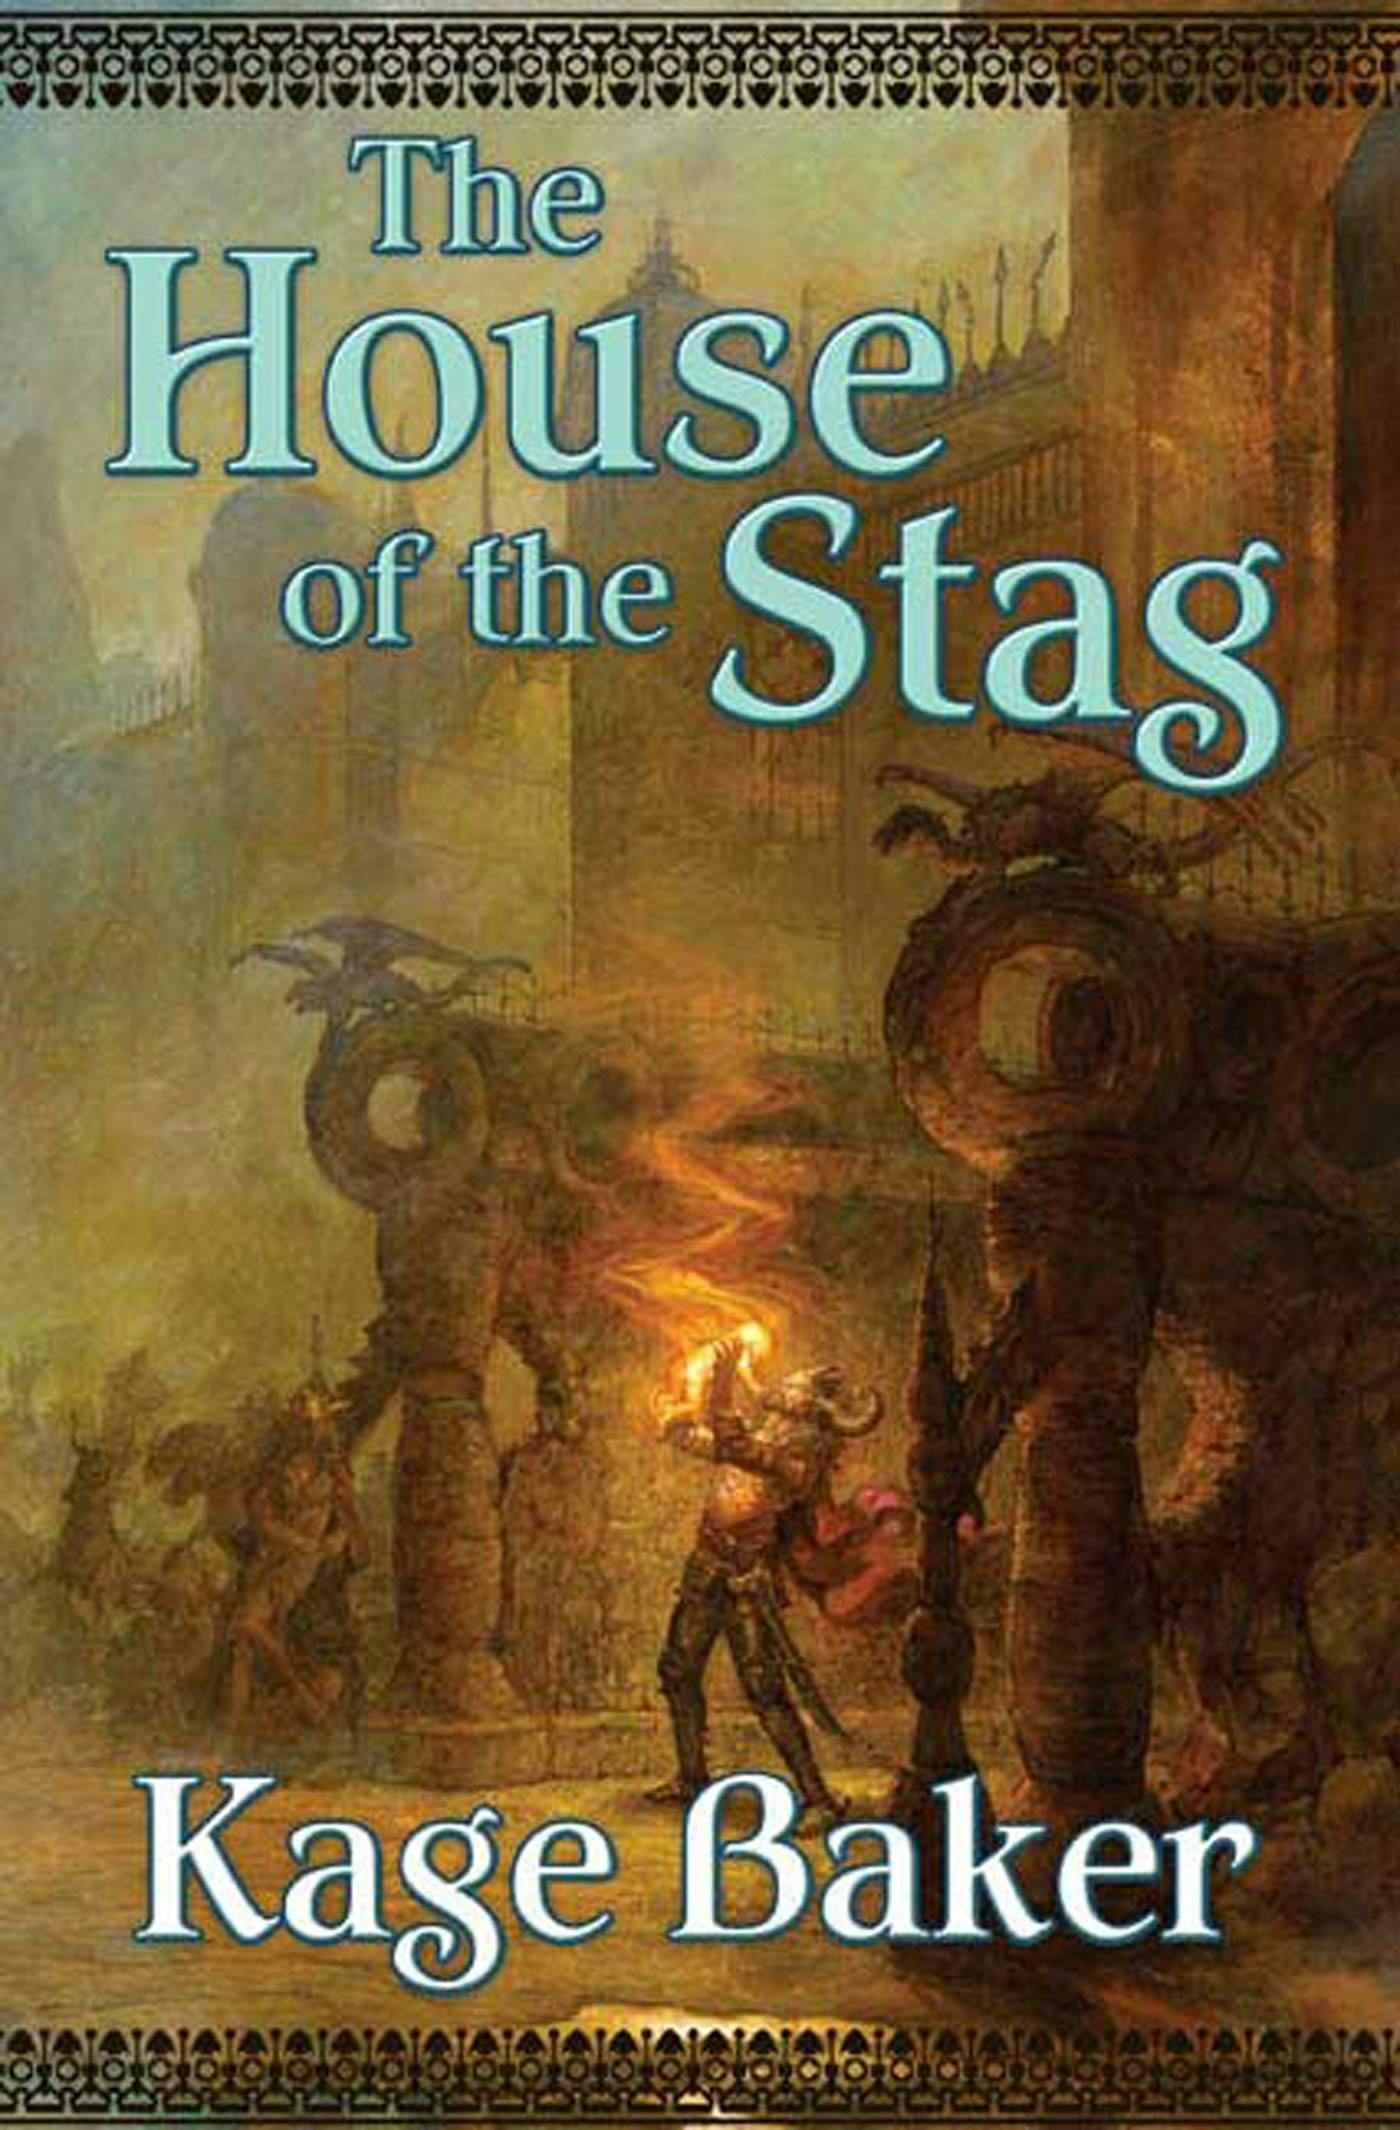 Cover for the book titled as: The House of the Stag